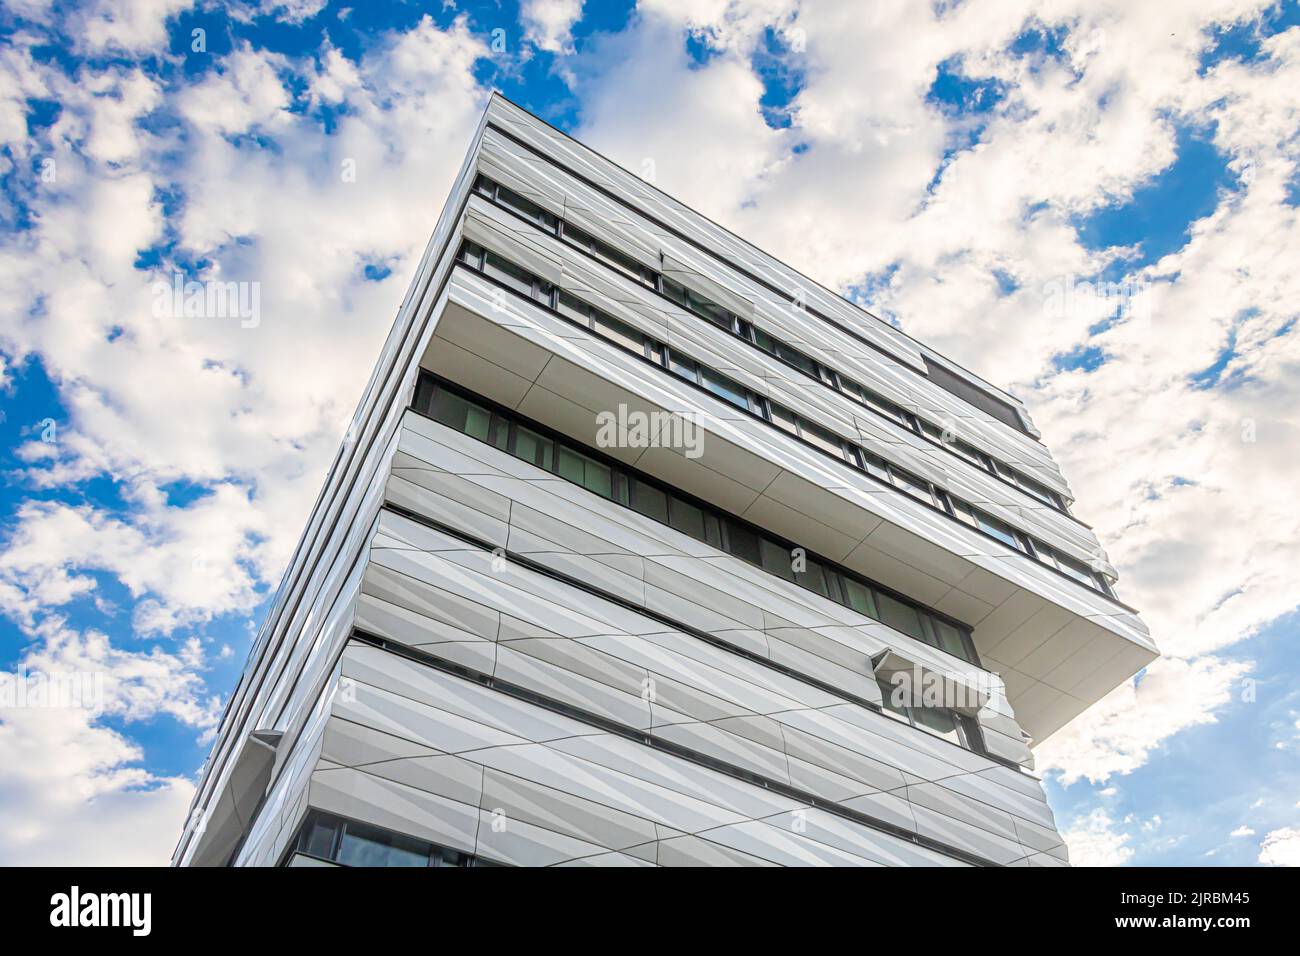 a perspective view of modern building with overhanging upper floors and striking facade against a dramatically lit sky with partial cloud cover Stock Photo